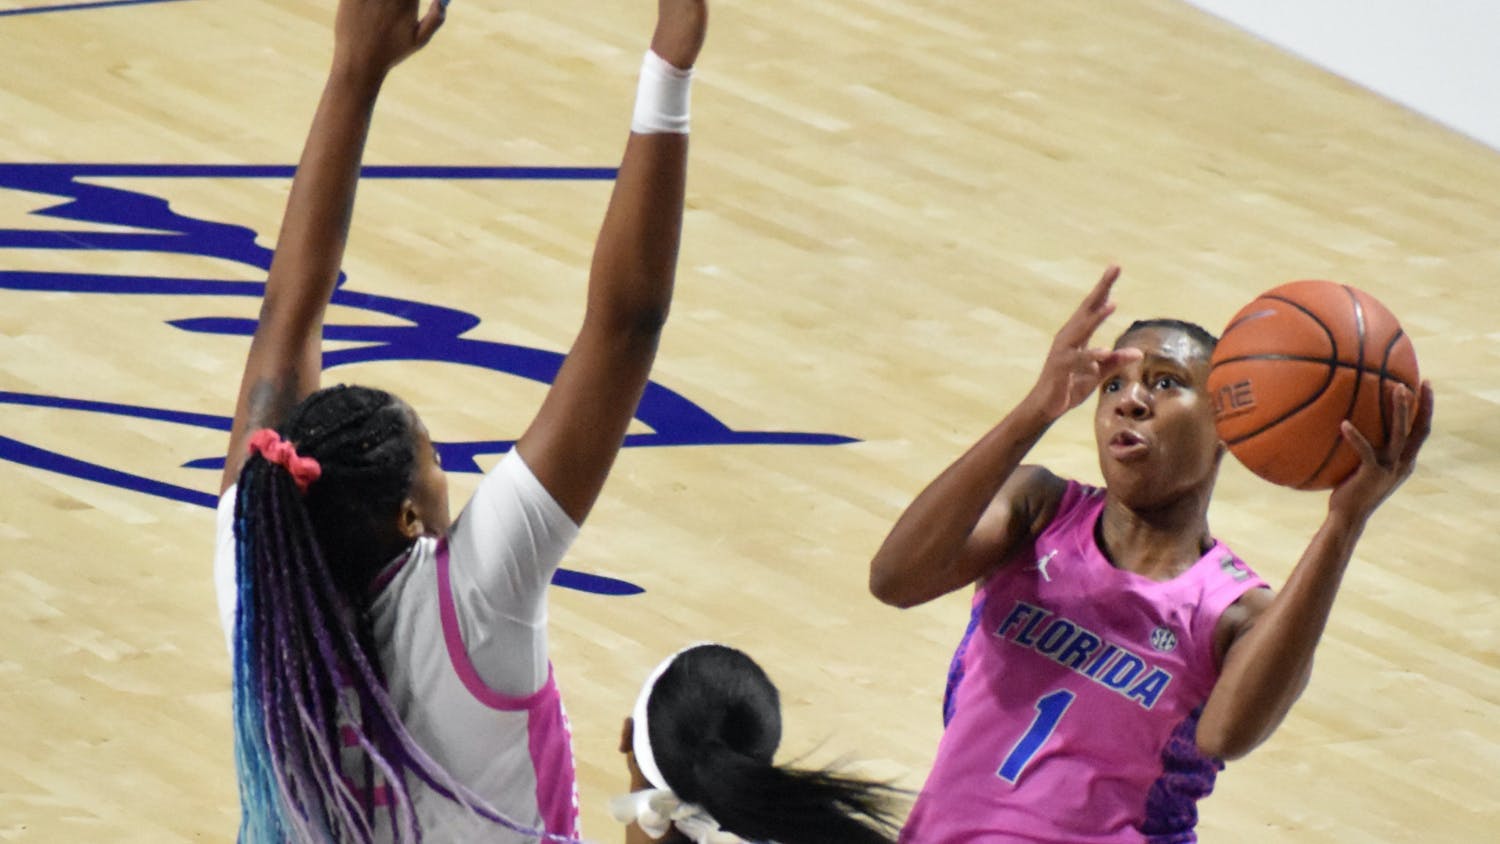 Star guard Kiara Smith led the Gators with 23 points while recording her sixth double-double season Monday night. 